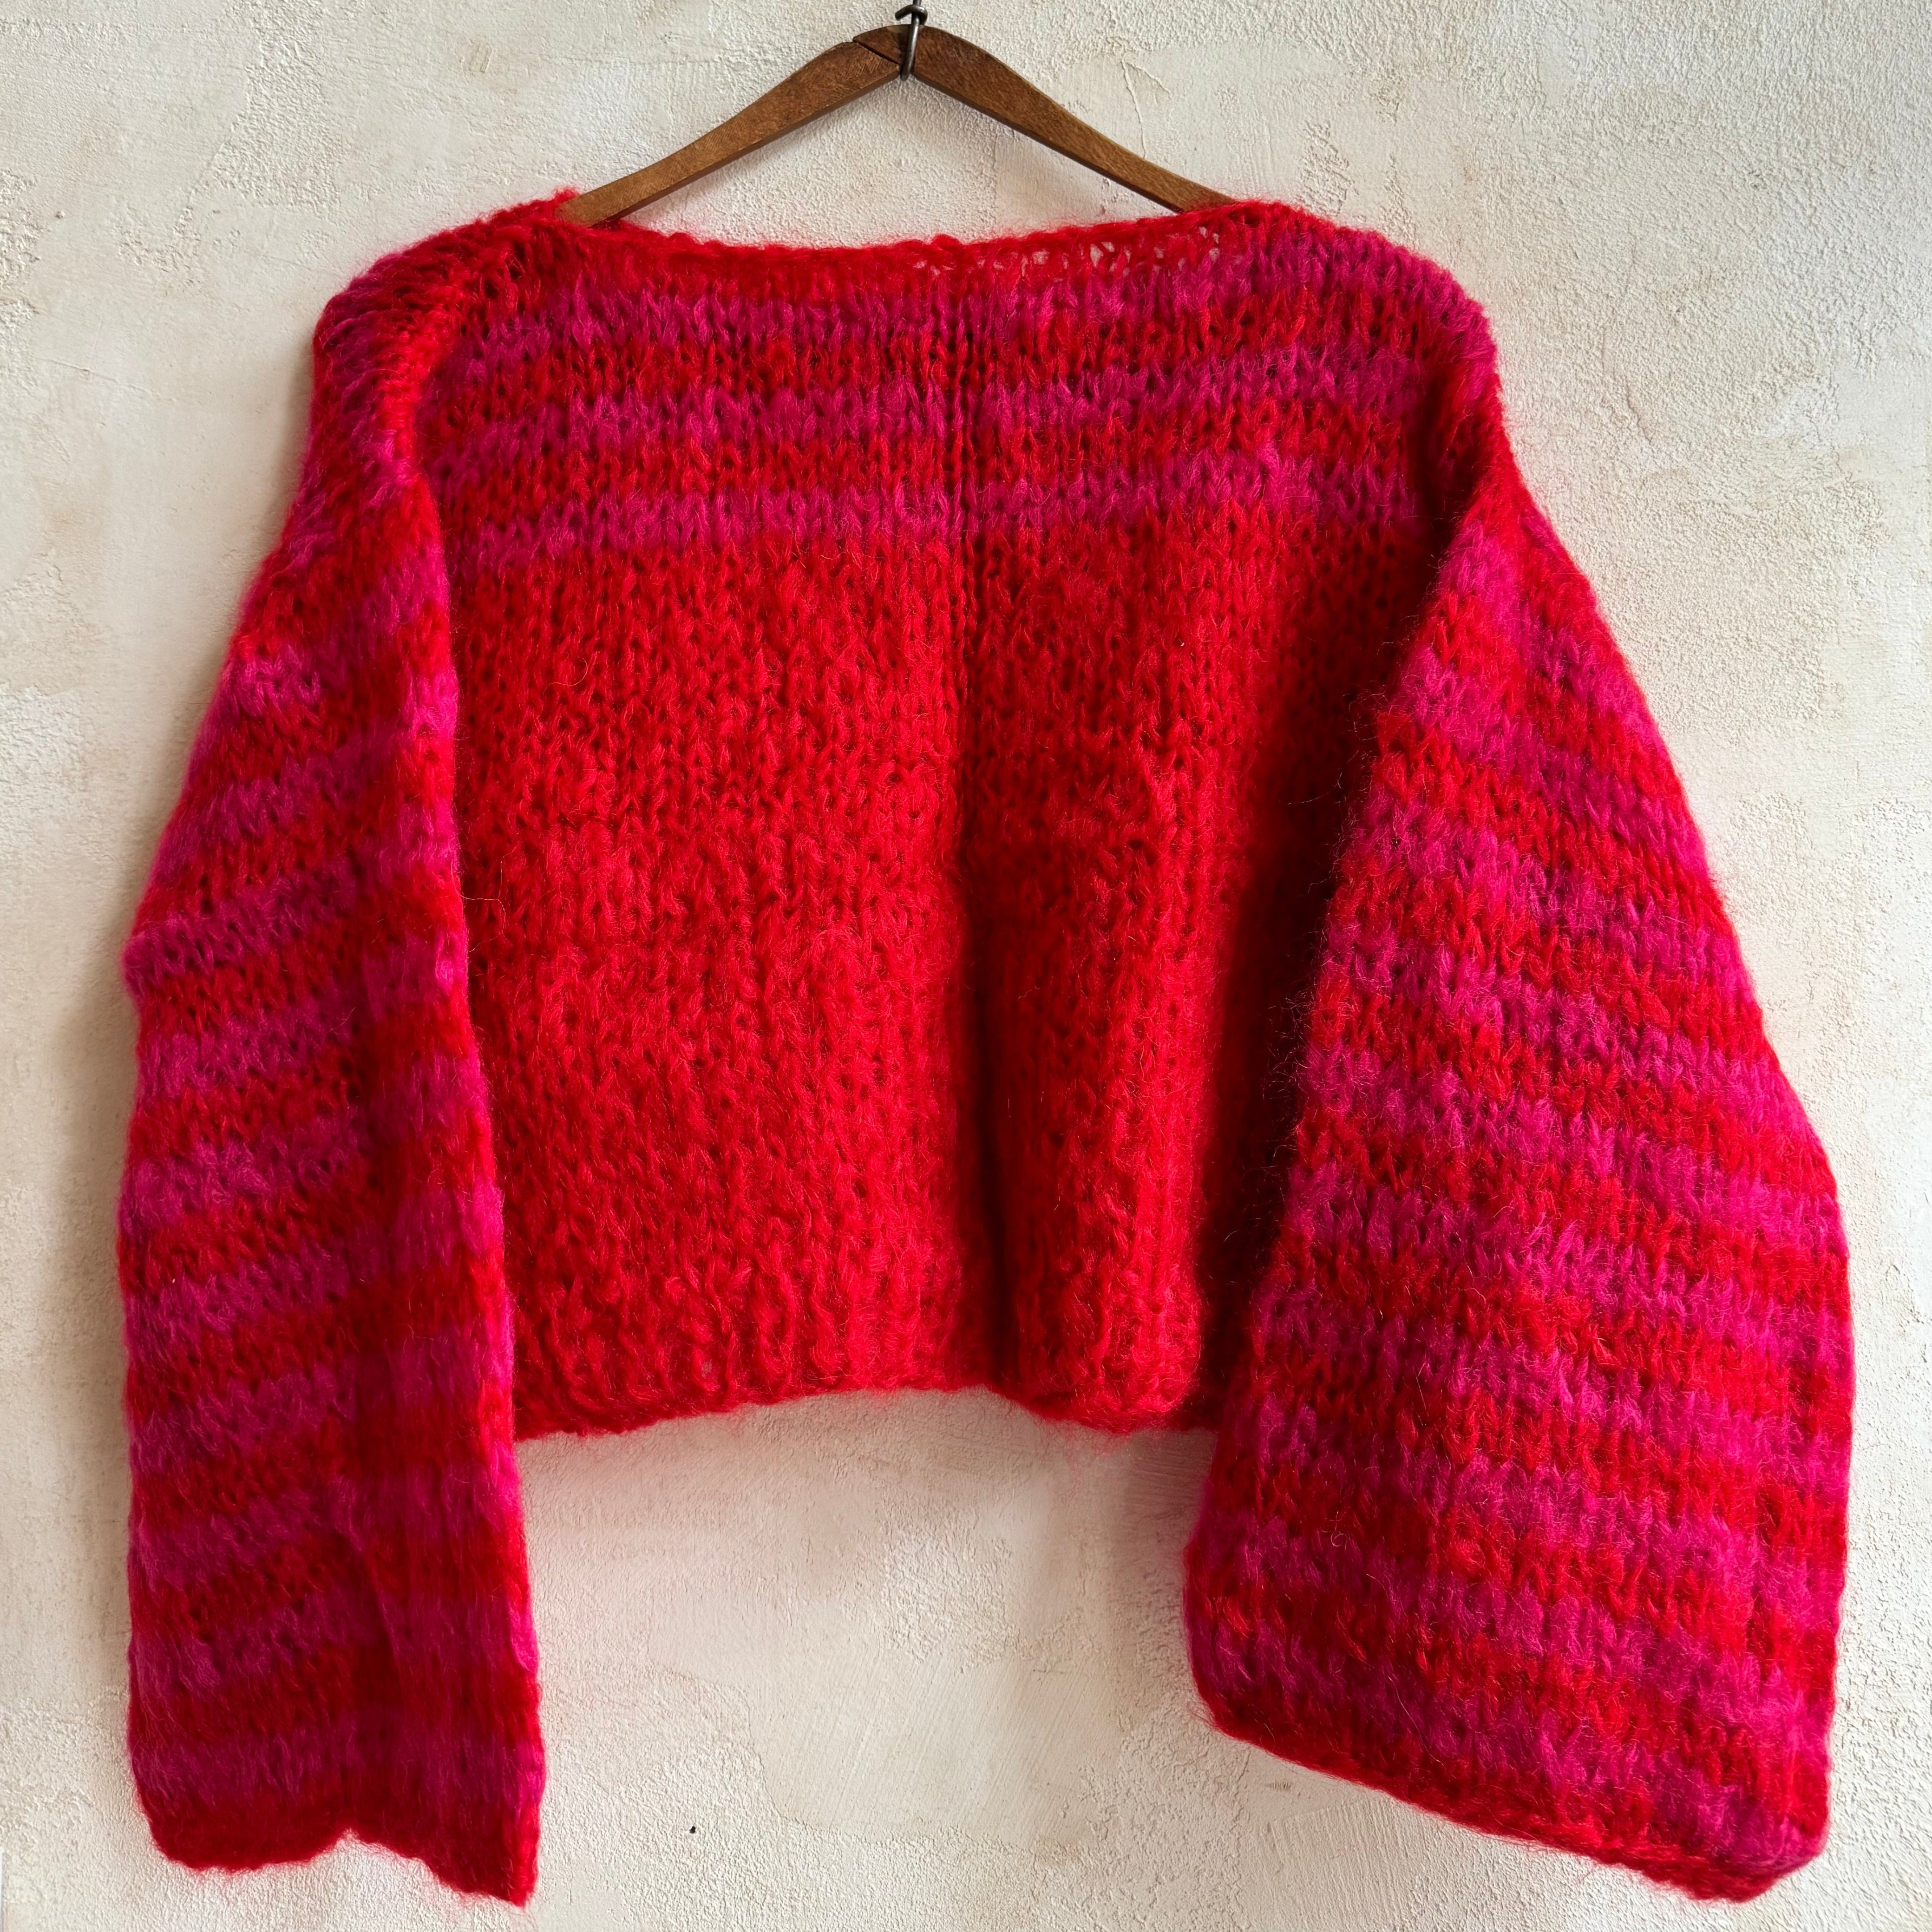 Red + Pink Thick Stripe Sweater by Rayés